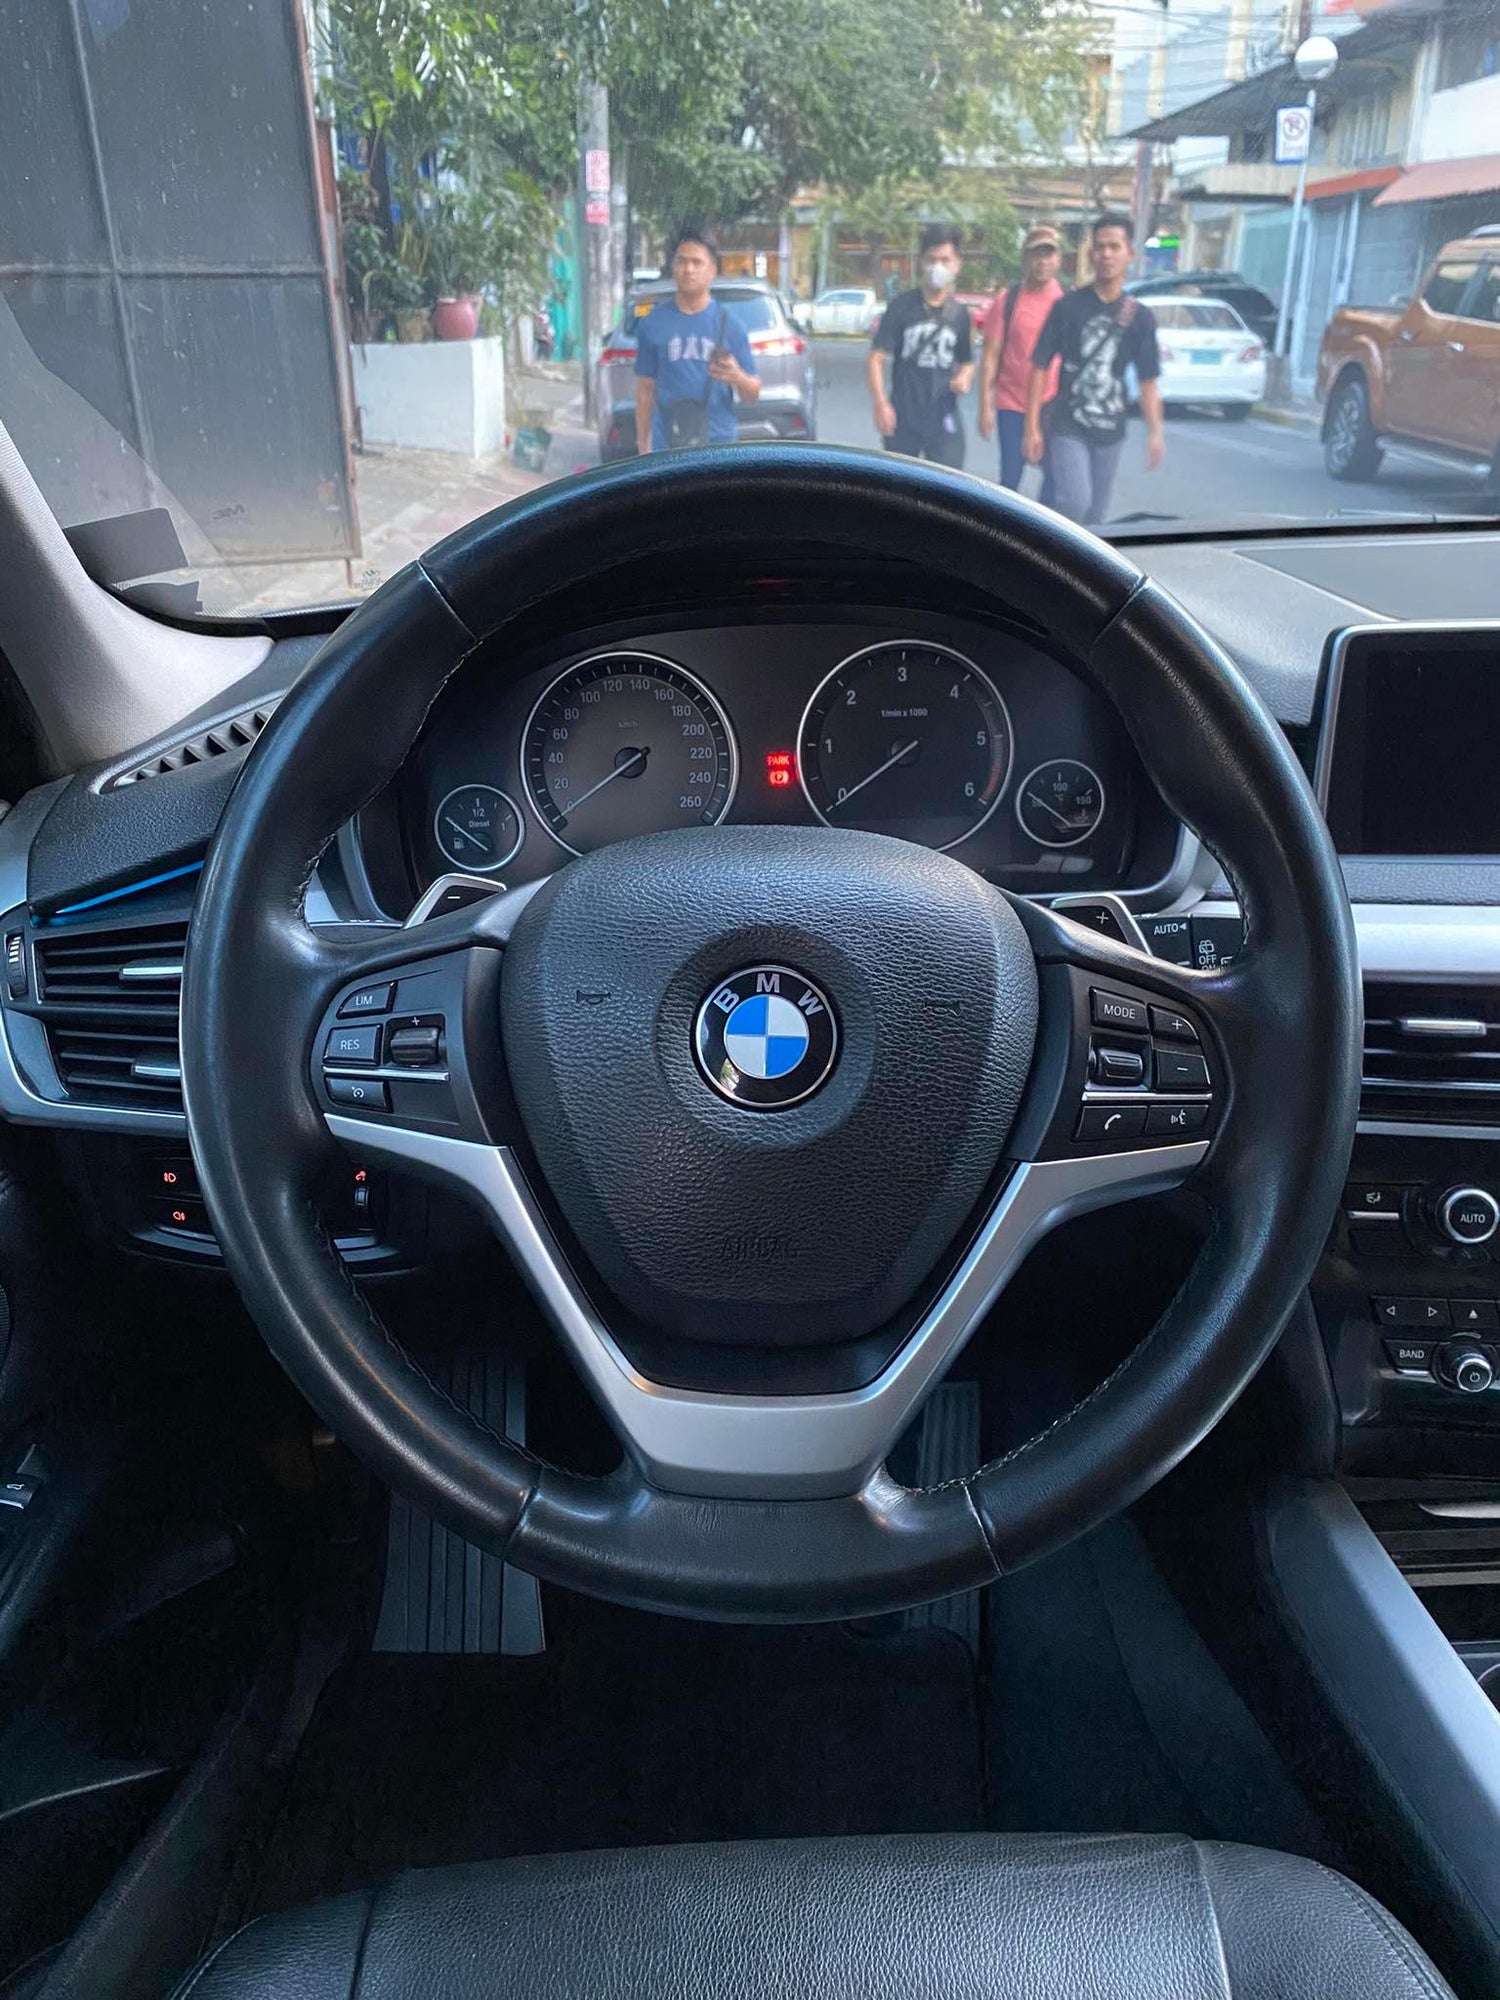 2017 BMW X5 XDRIVE 25D AUTOMATIC TRANSMISSION | Secondhand Used Cars for Sale at Manila Auto Display.